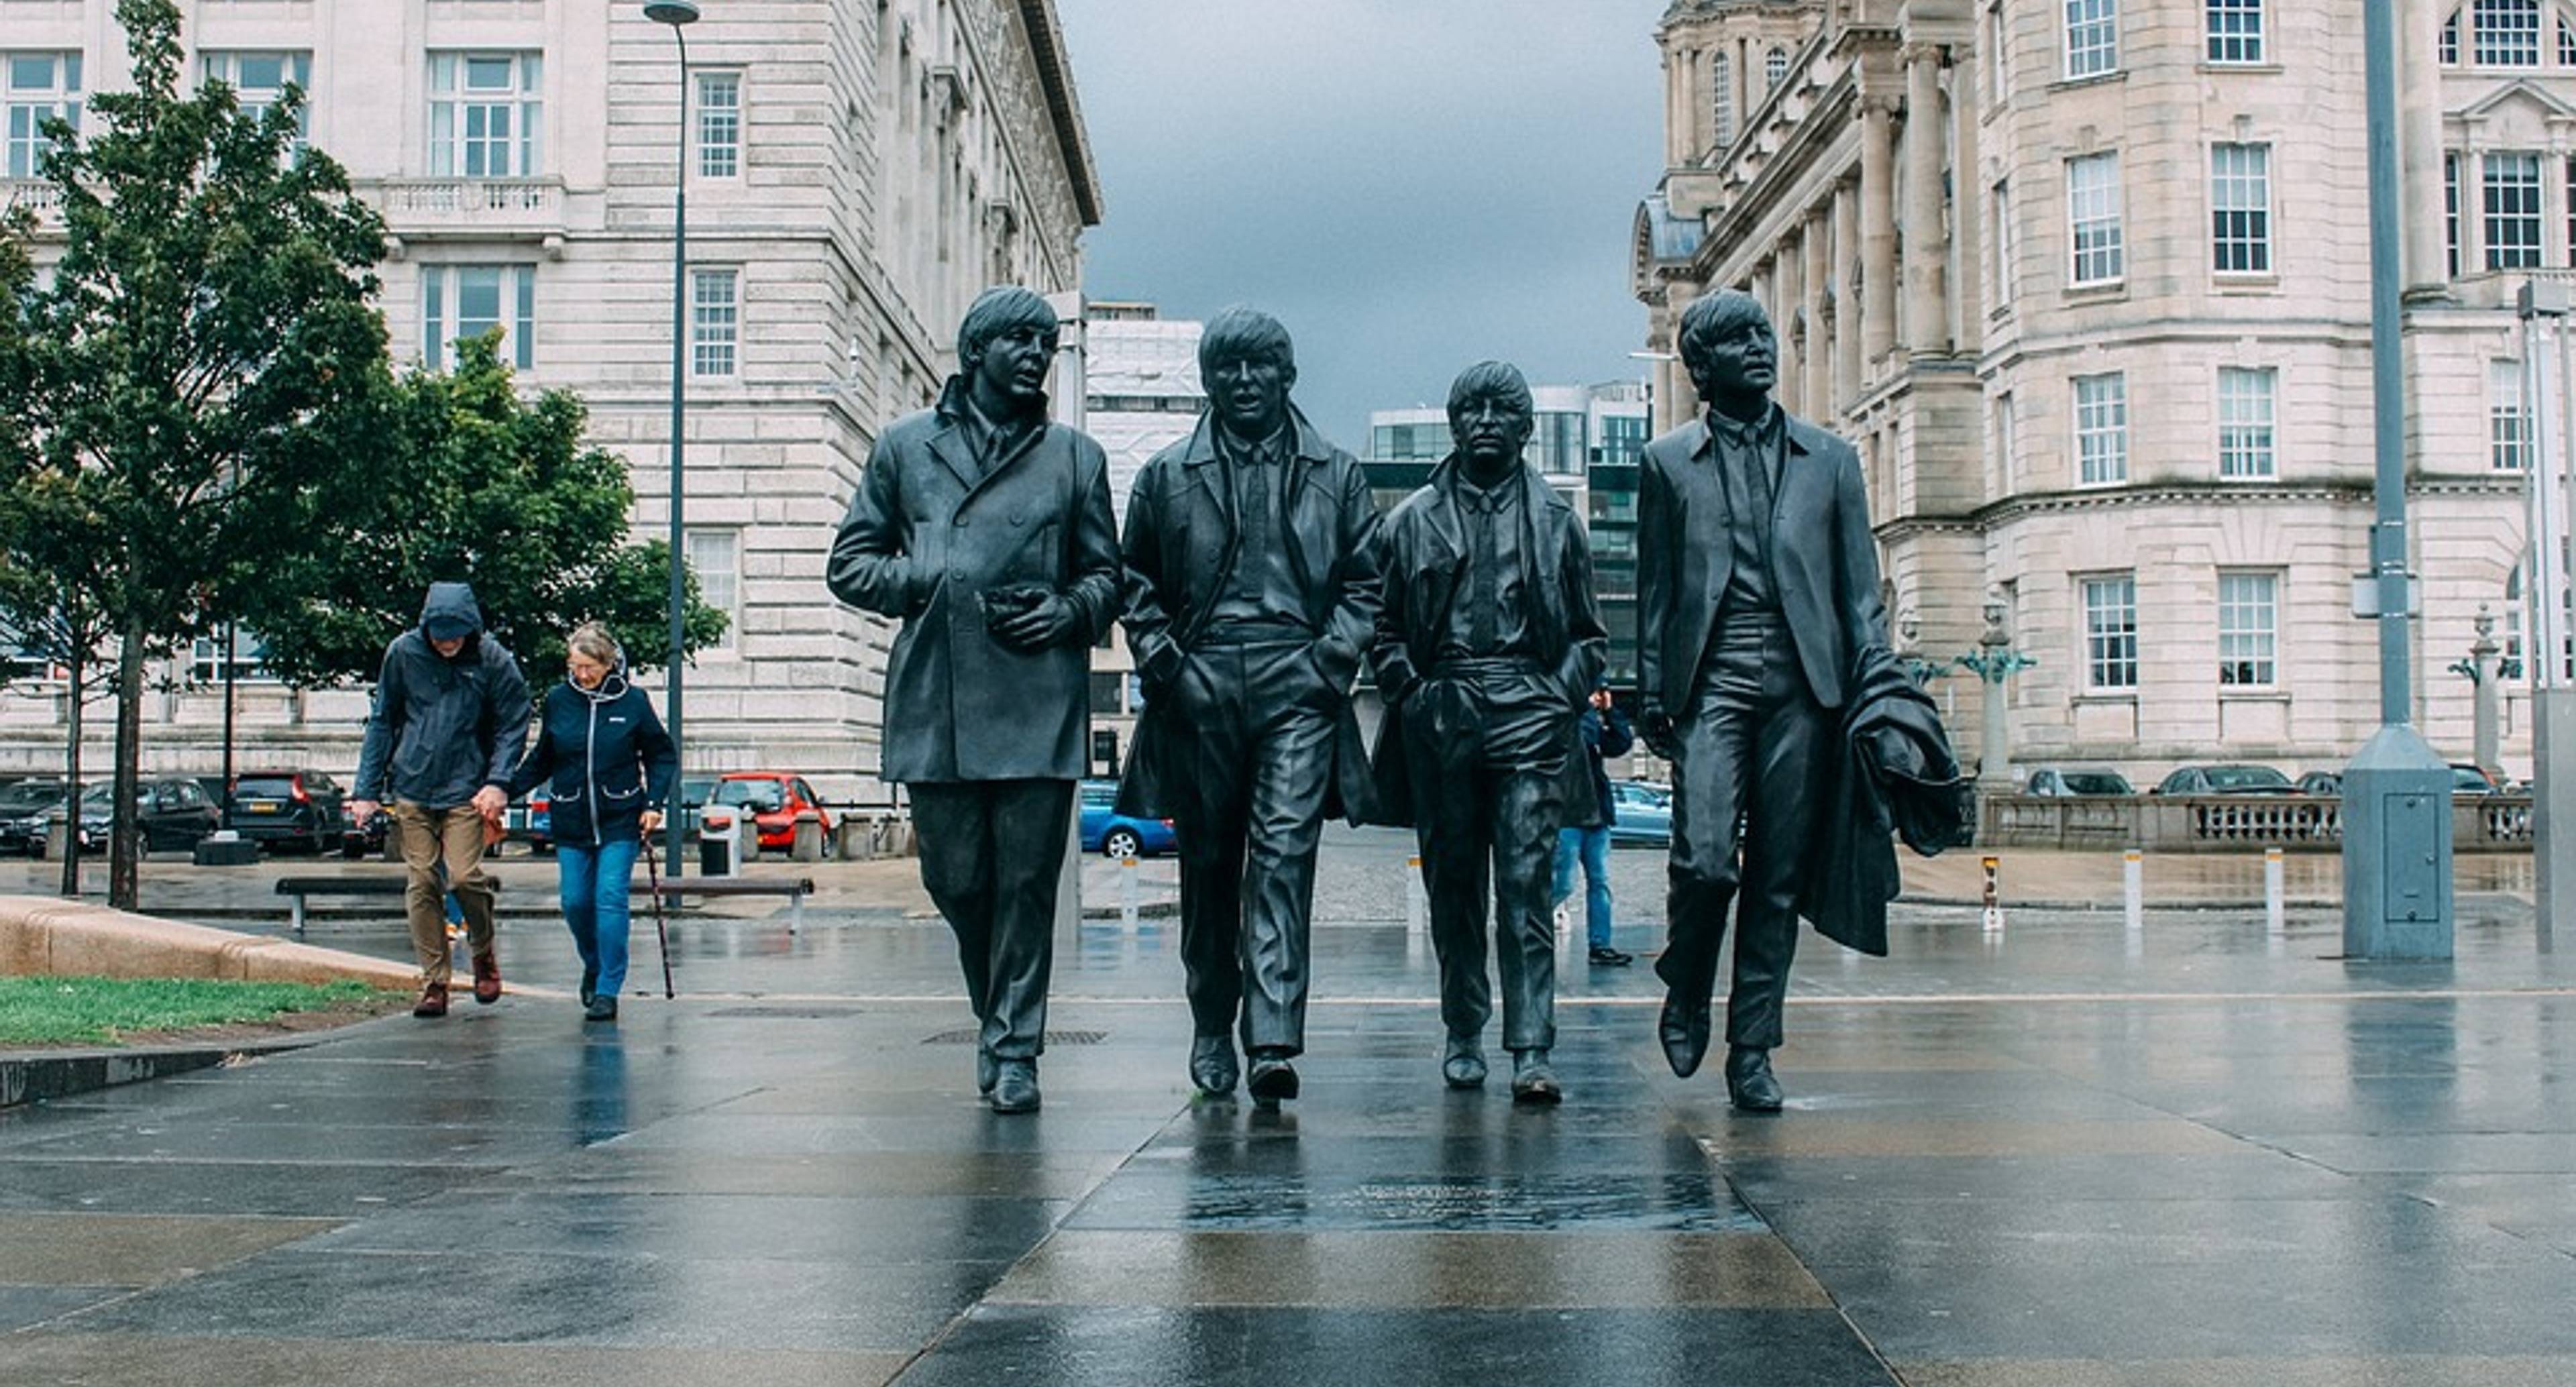 The History of Liverpool Is Equal to the History of the Beatles